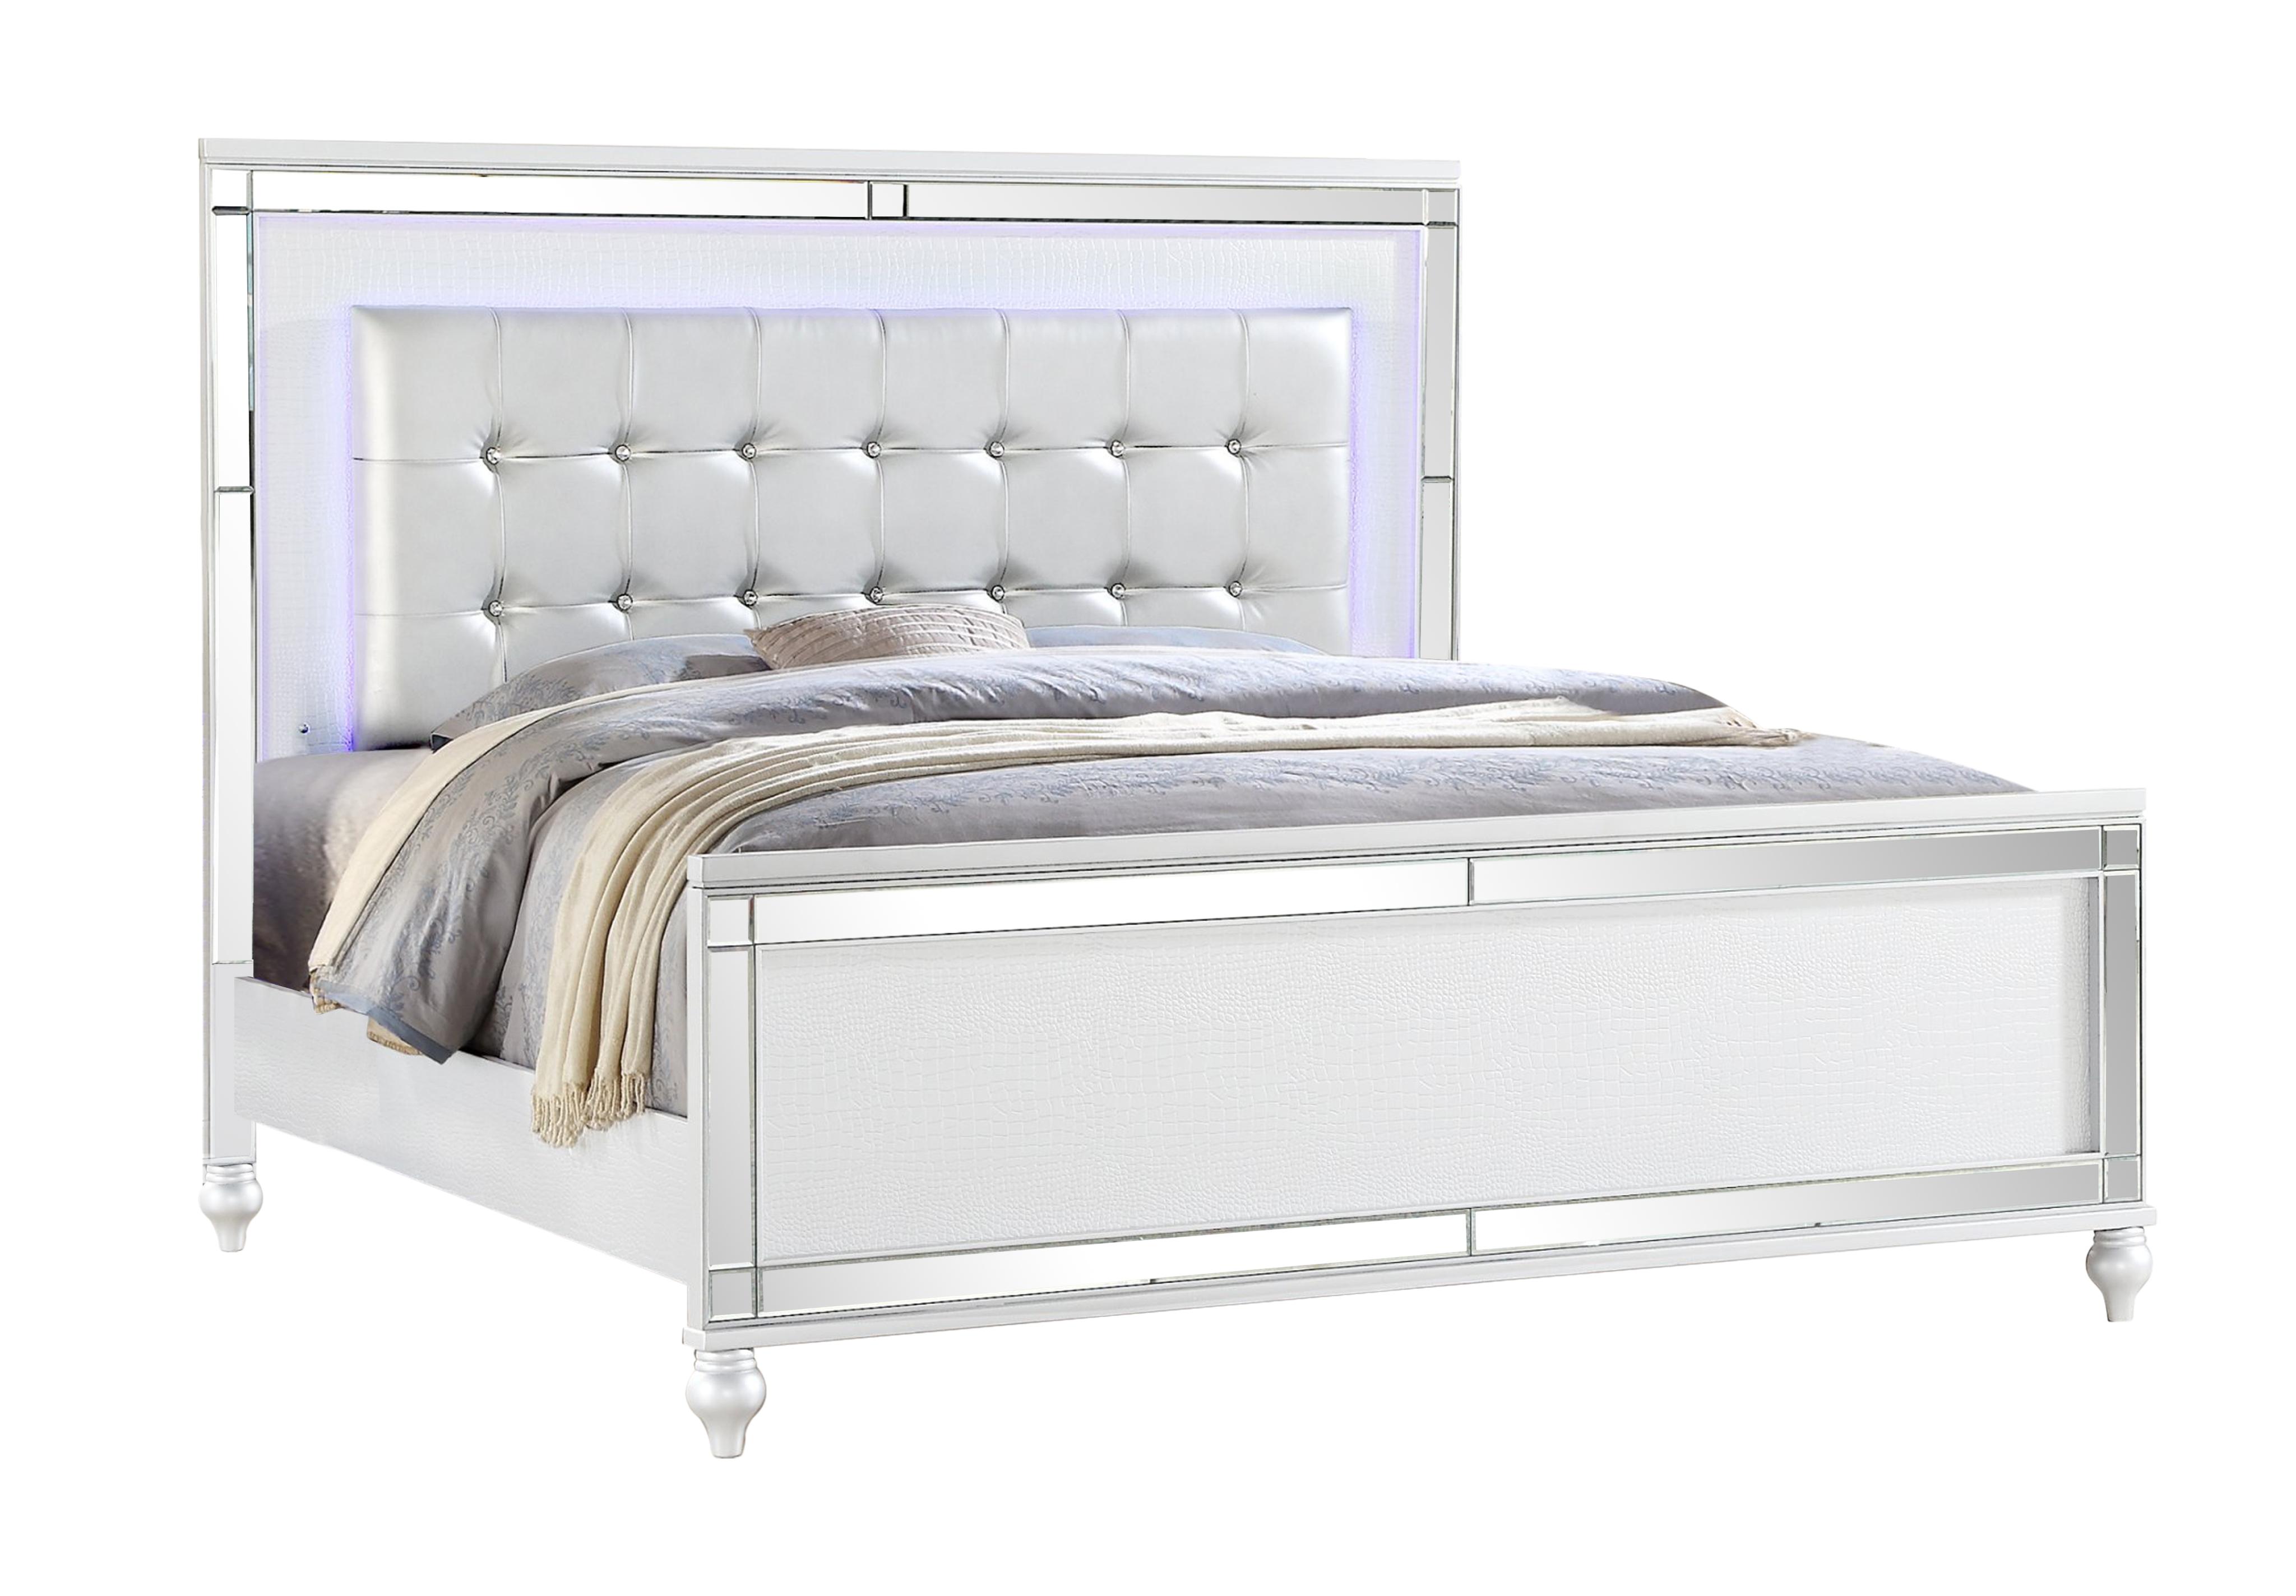 Contemporary, Modern Panel Bed STERLING White GHF-808857914392 in White Eco-Leather